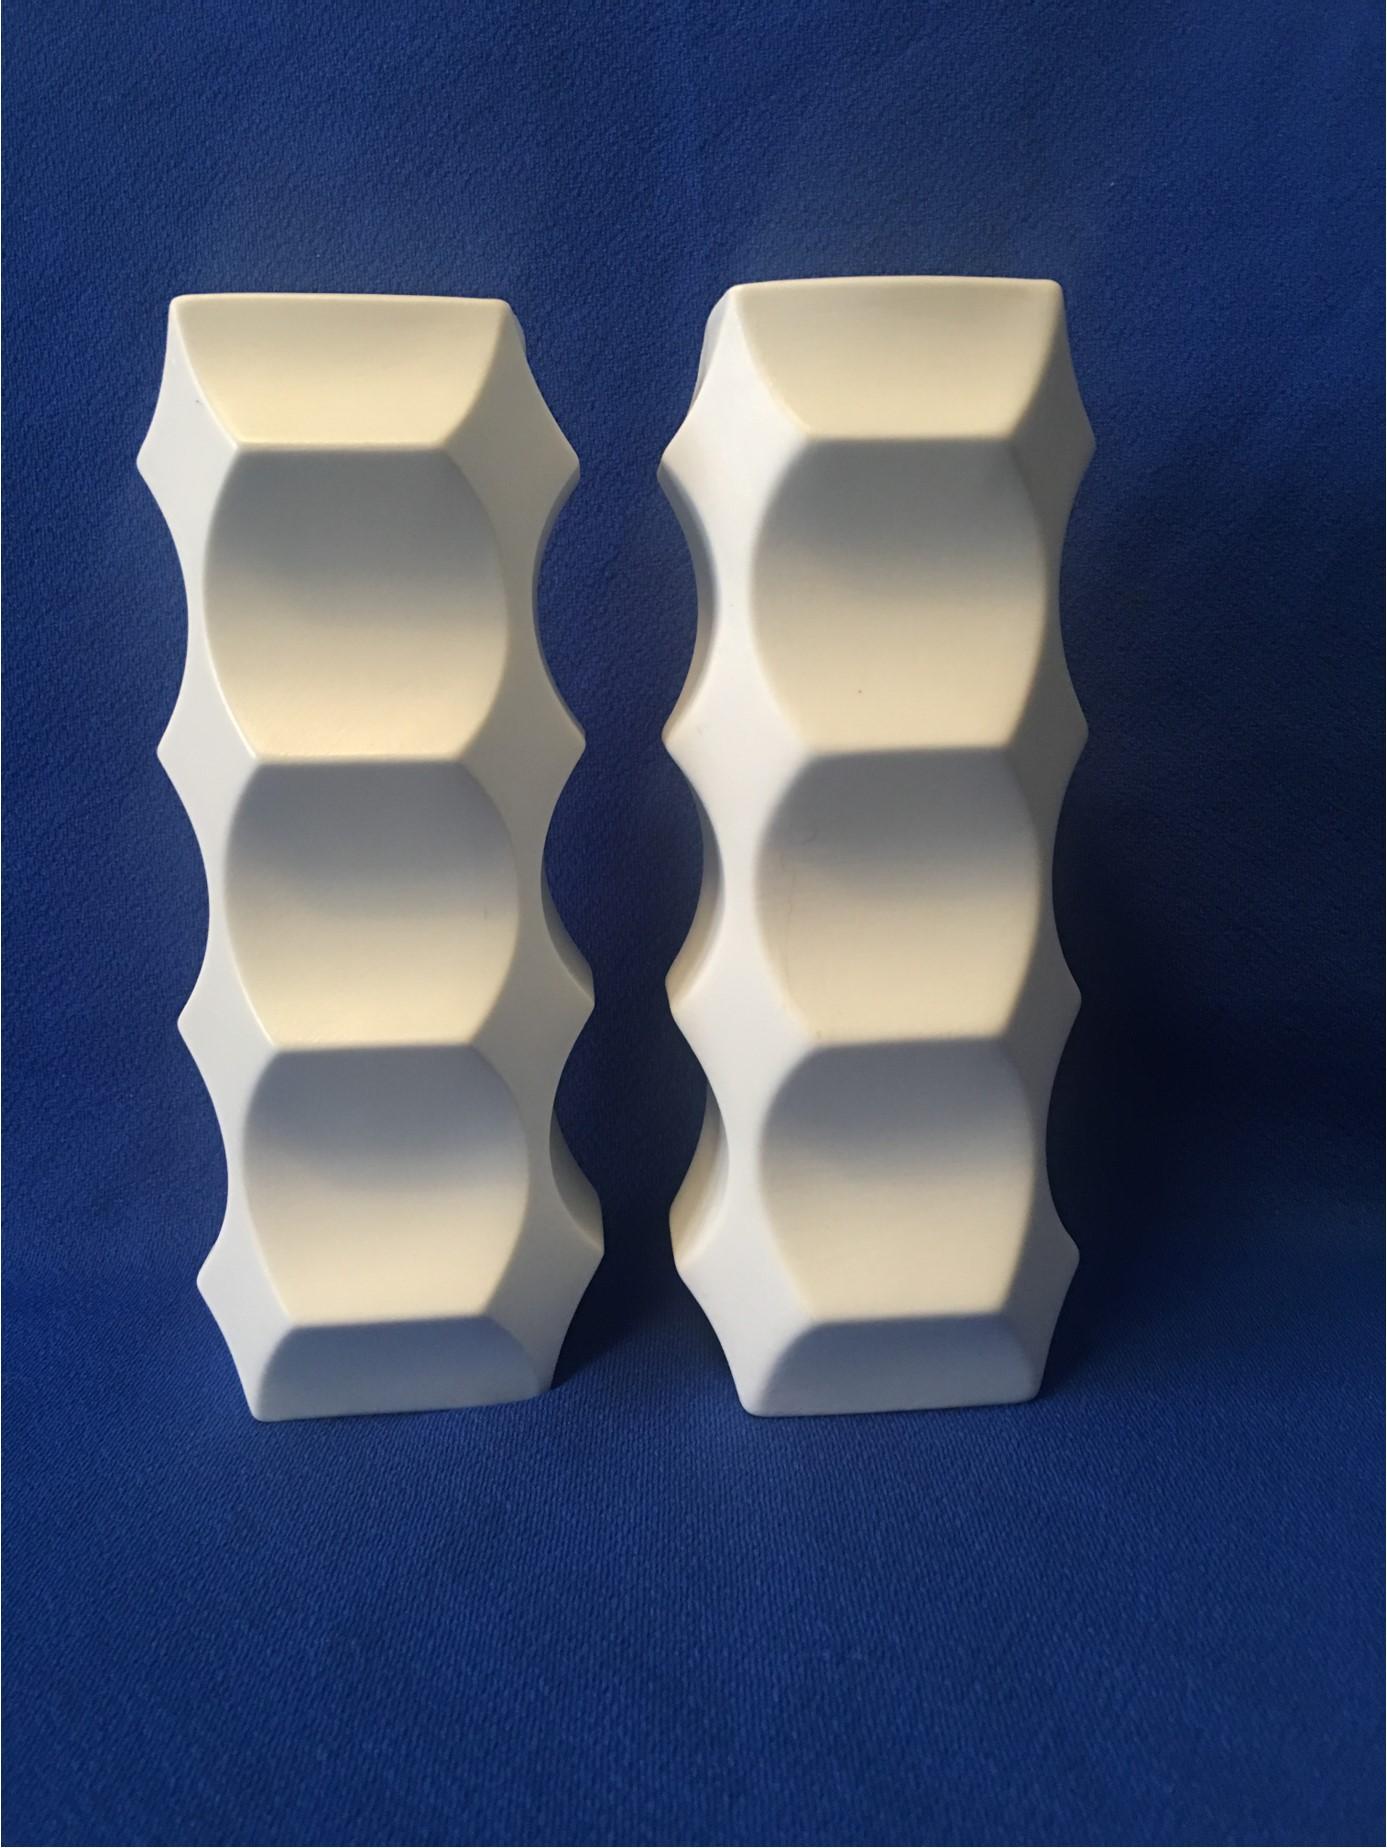 A nice pair of white bisque porcelain vases from the 1960s with a design by Heinrich Fuchs. Manufactured by Hutschenreuther Porcelain Company of Selb, Germany. The city and the porcelain company are renowned as 